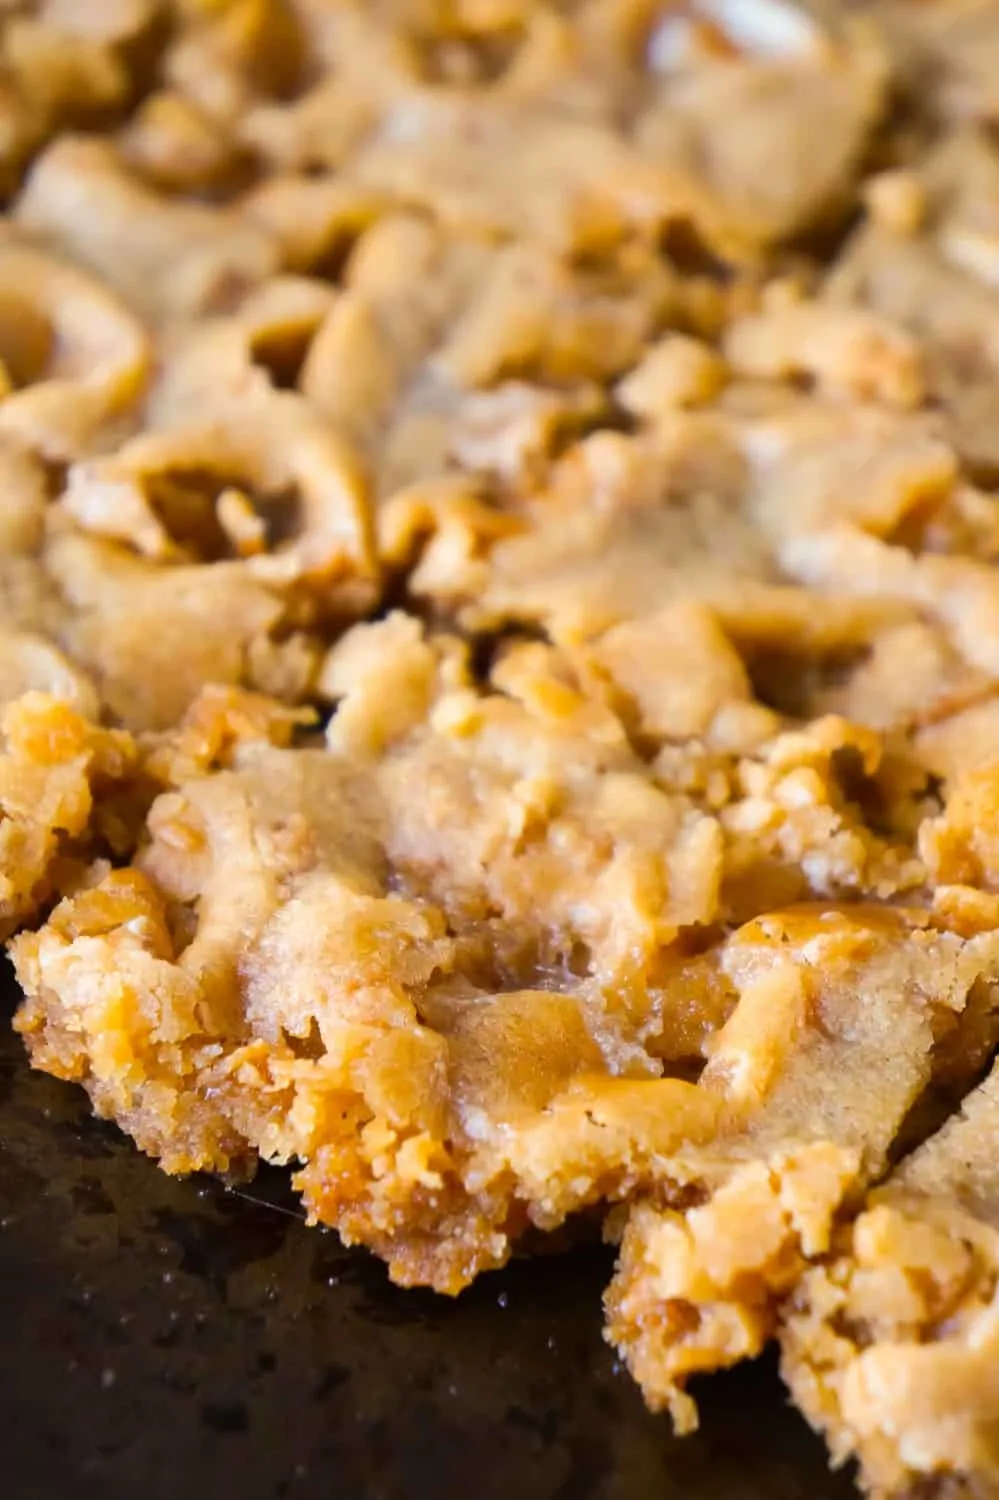 Peanut Butter Marshmallow Cookie Bars are an easy and delicious dessert. These peanut butter cookie bars are soft and chewy and loaded with Skor bits.